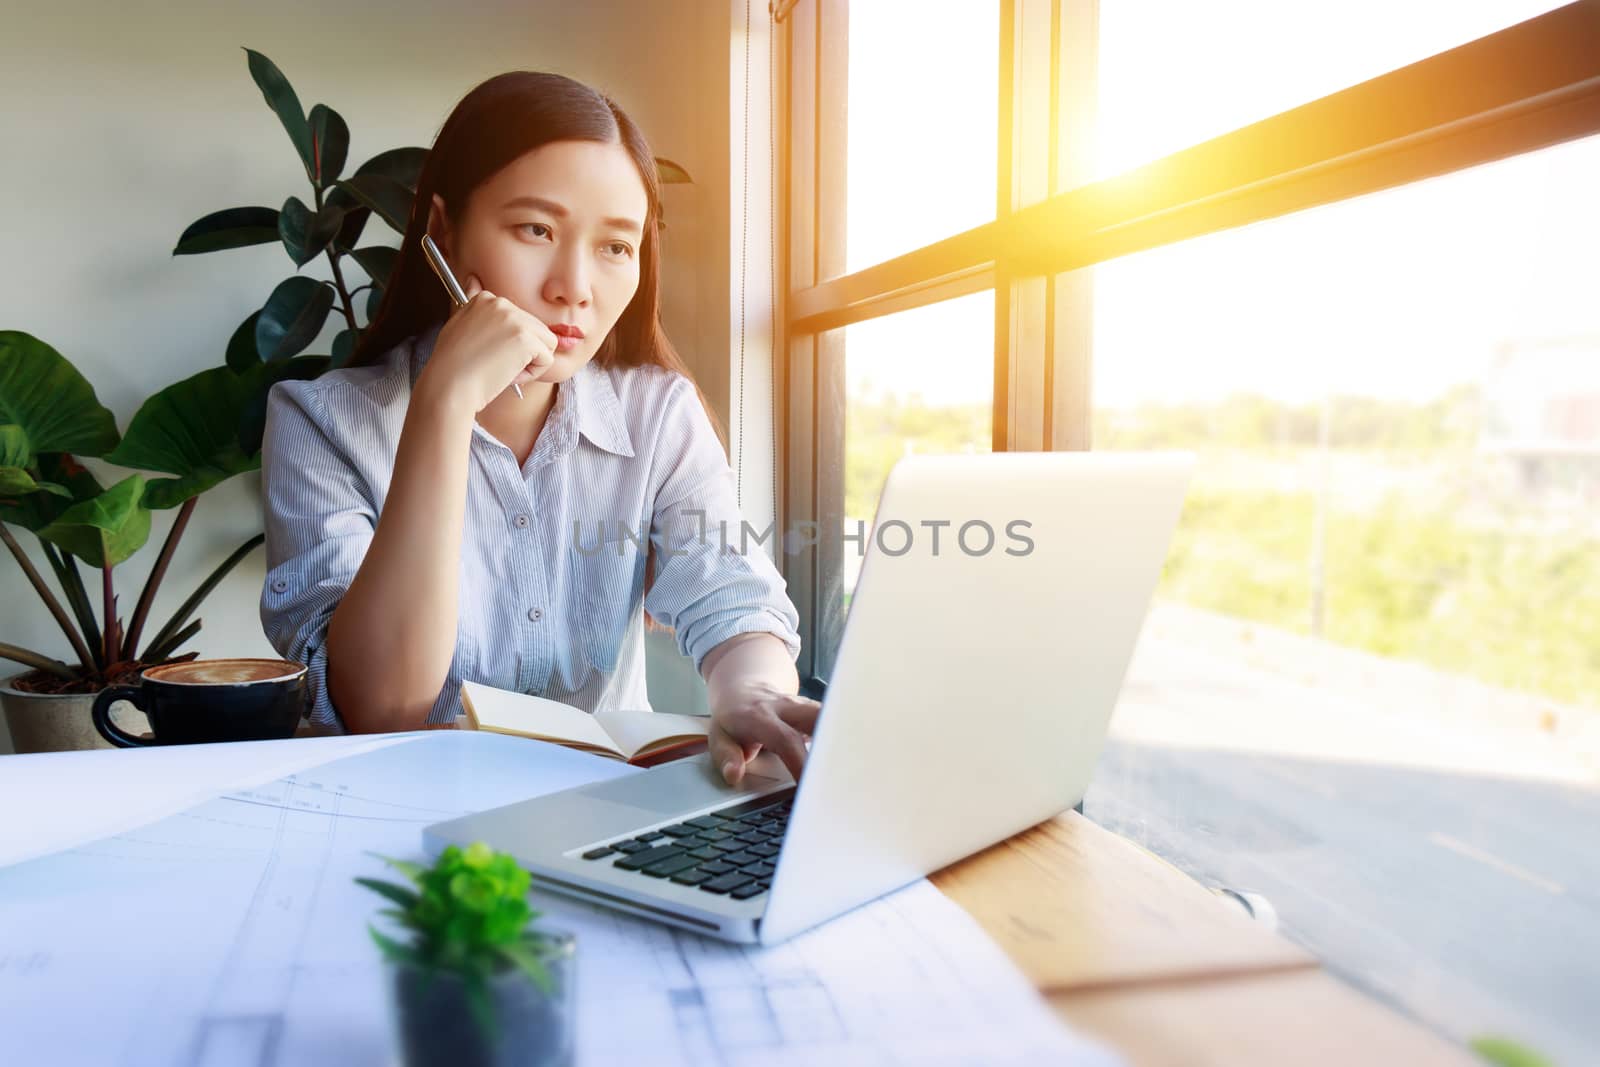 Serious Asian female architects working under pressure using laptop for researching the architectural analyze project sit near the window in modern home for freelance job. Asia model